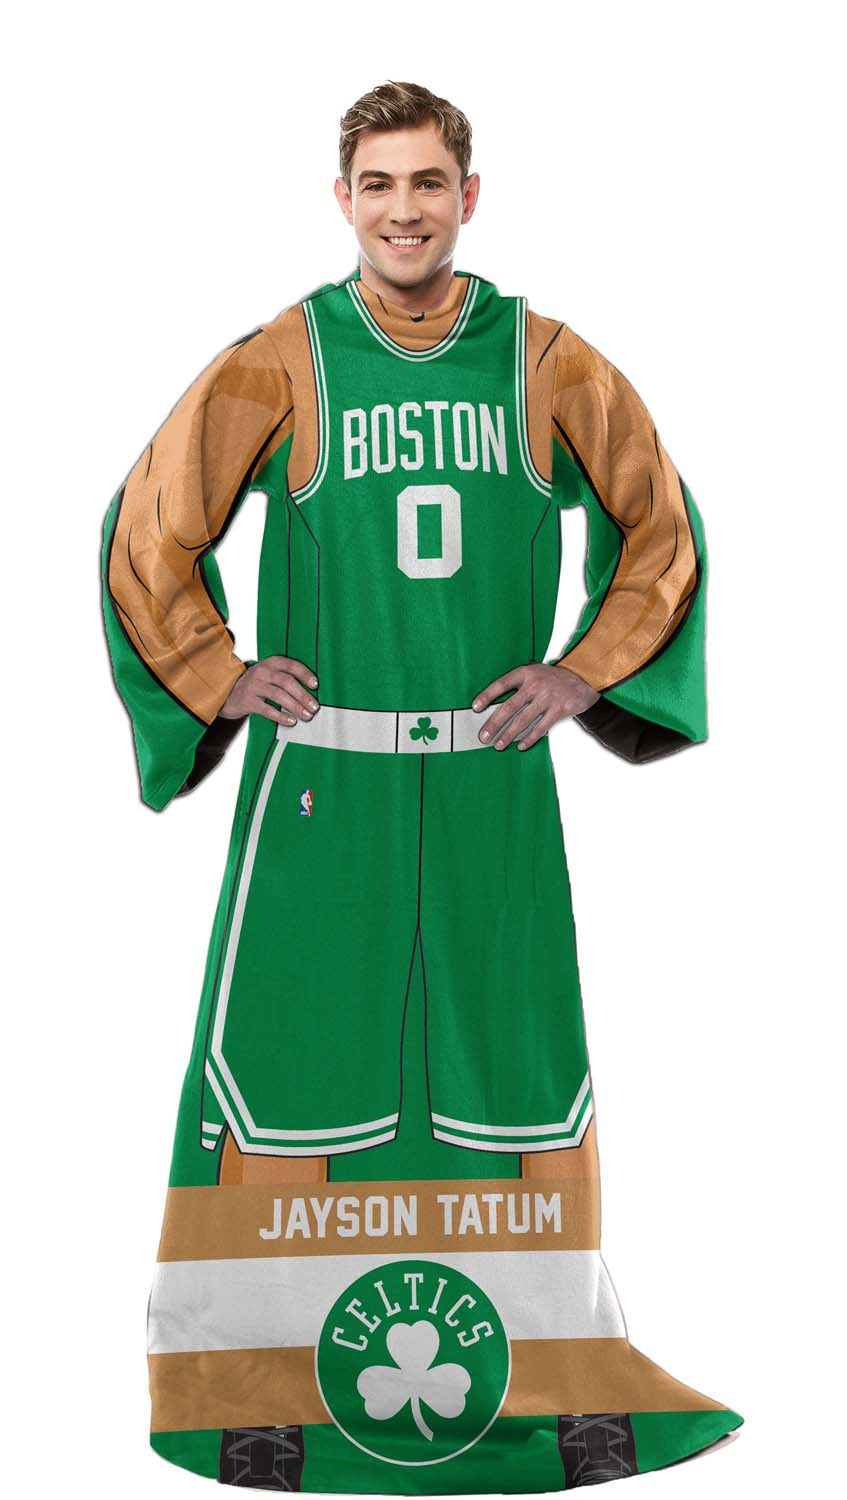 Boston Celtics Officially Licensed Wearable Blankets with Sleeves - Green